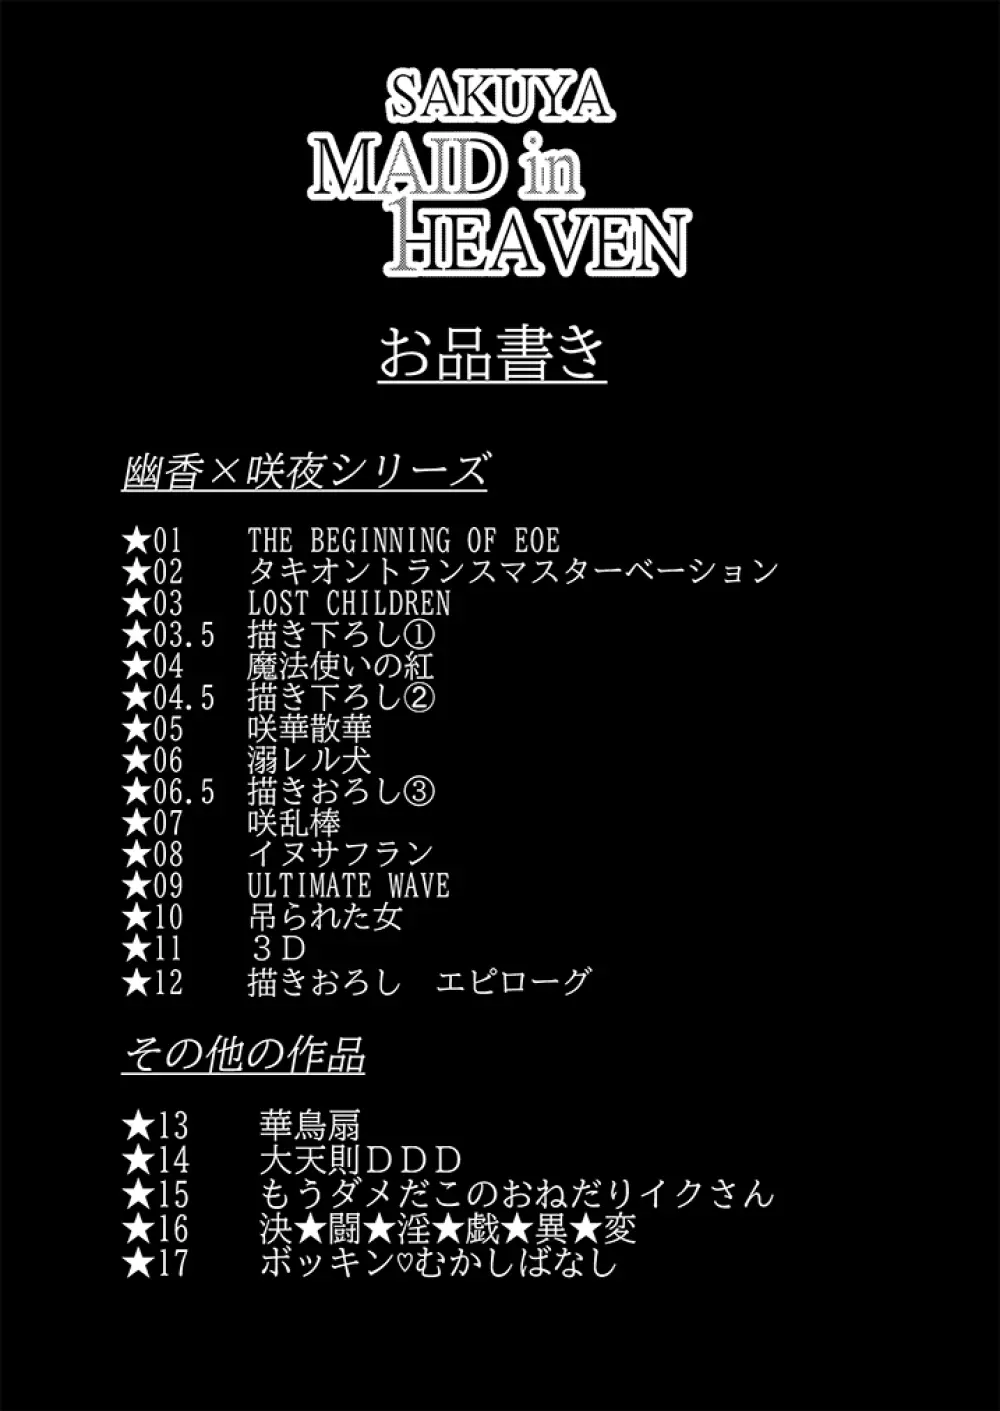 SAKUYA MAID in HEAVEN/ALL IN 1 3ページ